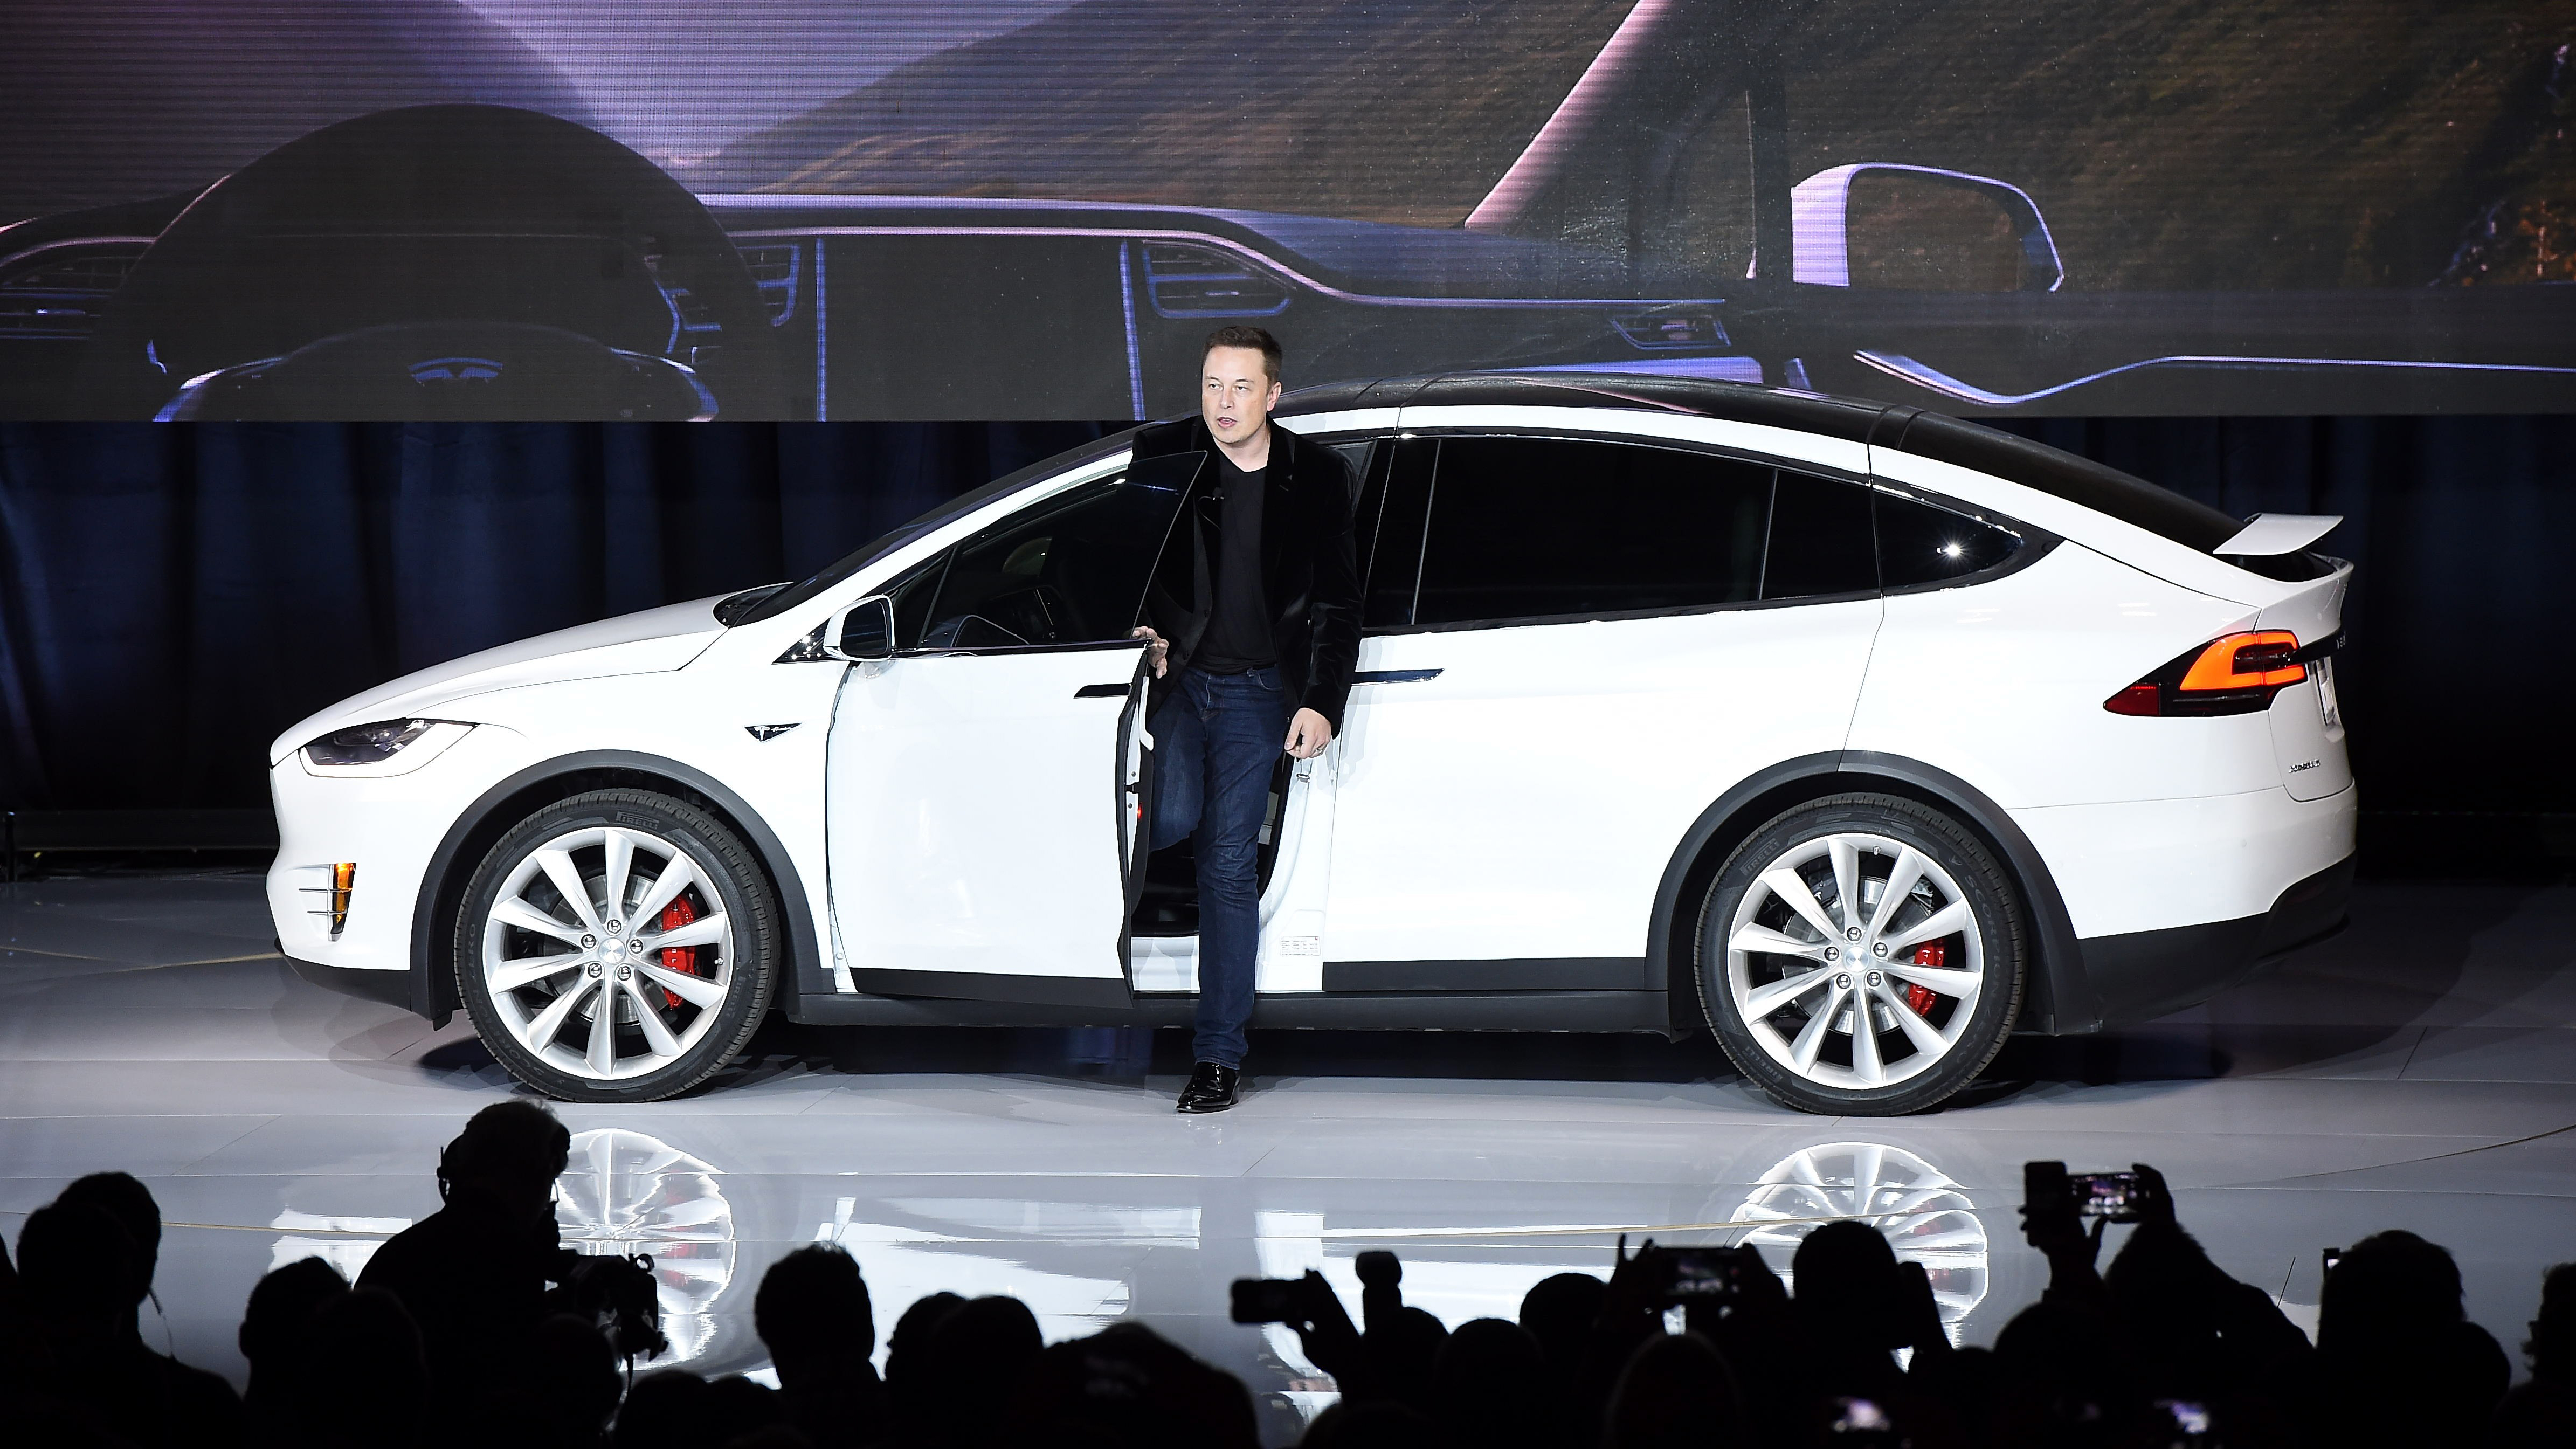 Tesla's full self-driving mode is actually not fully self-driving - Marketplace